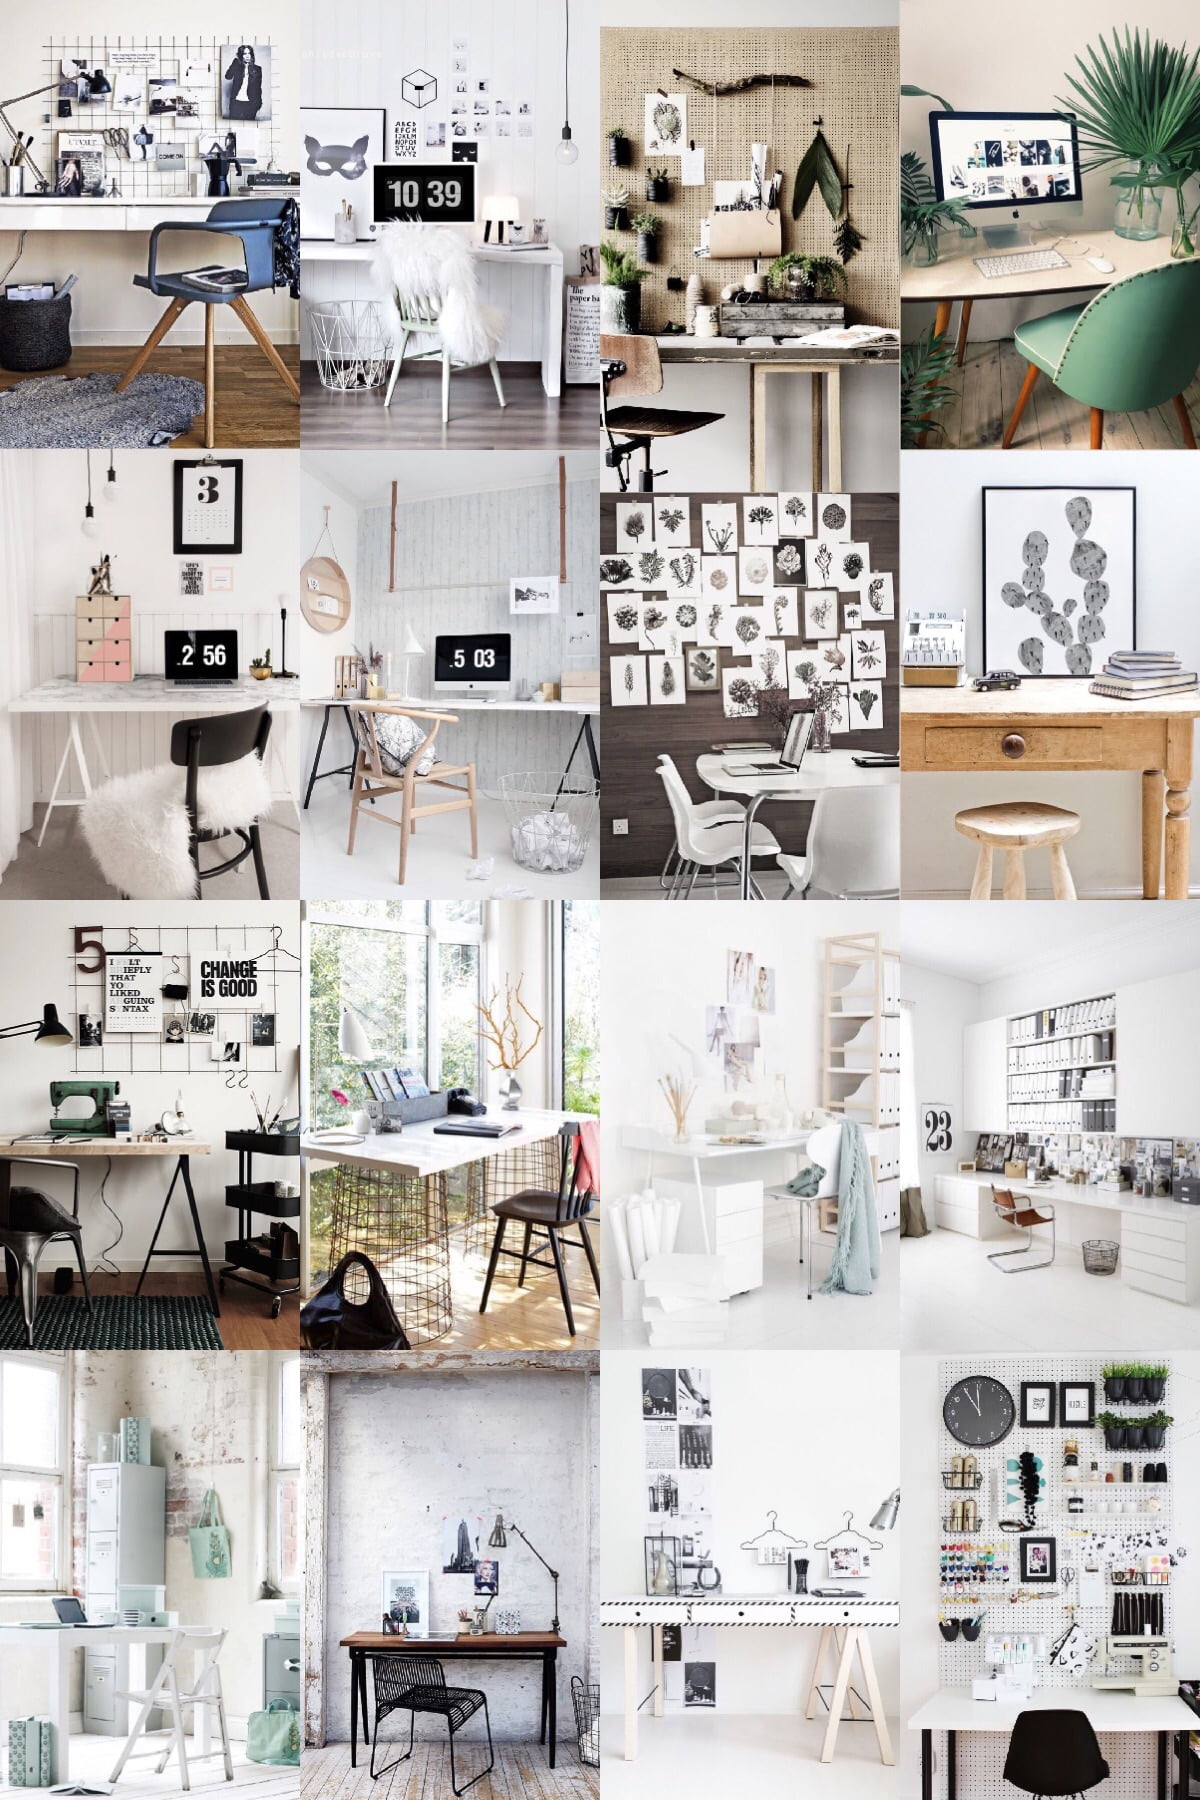 #myhomeoffice home workspace inspirations 